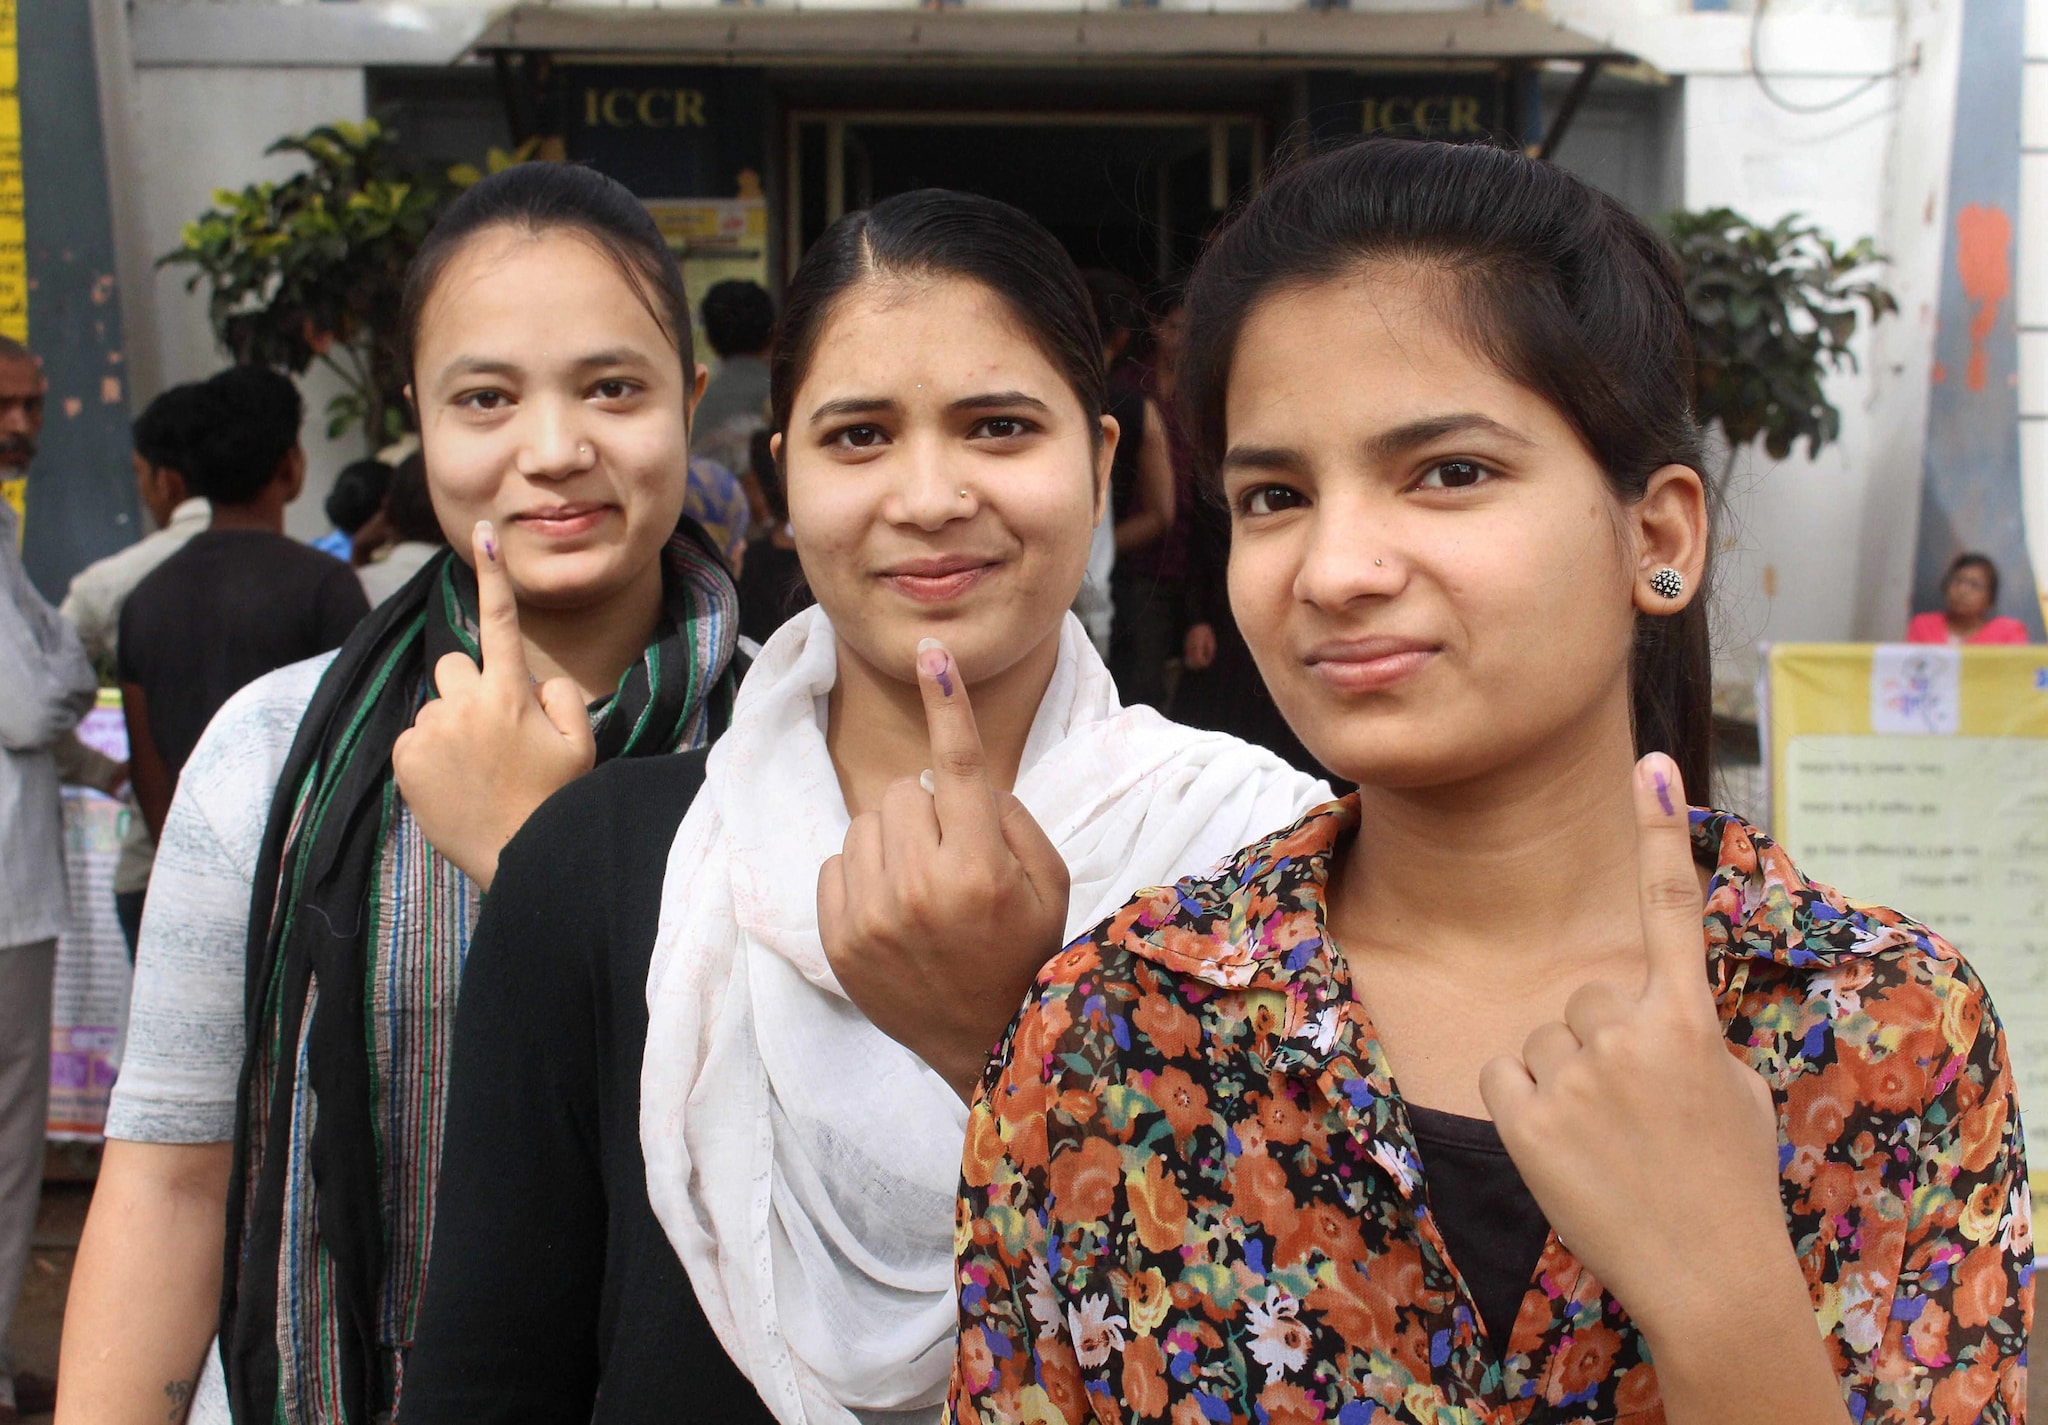 People cast their votes in sixth phase of 2019 Lok Sabha elections - cnbctv18.com4800 x 3340